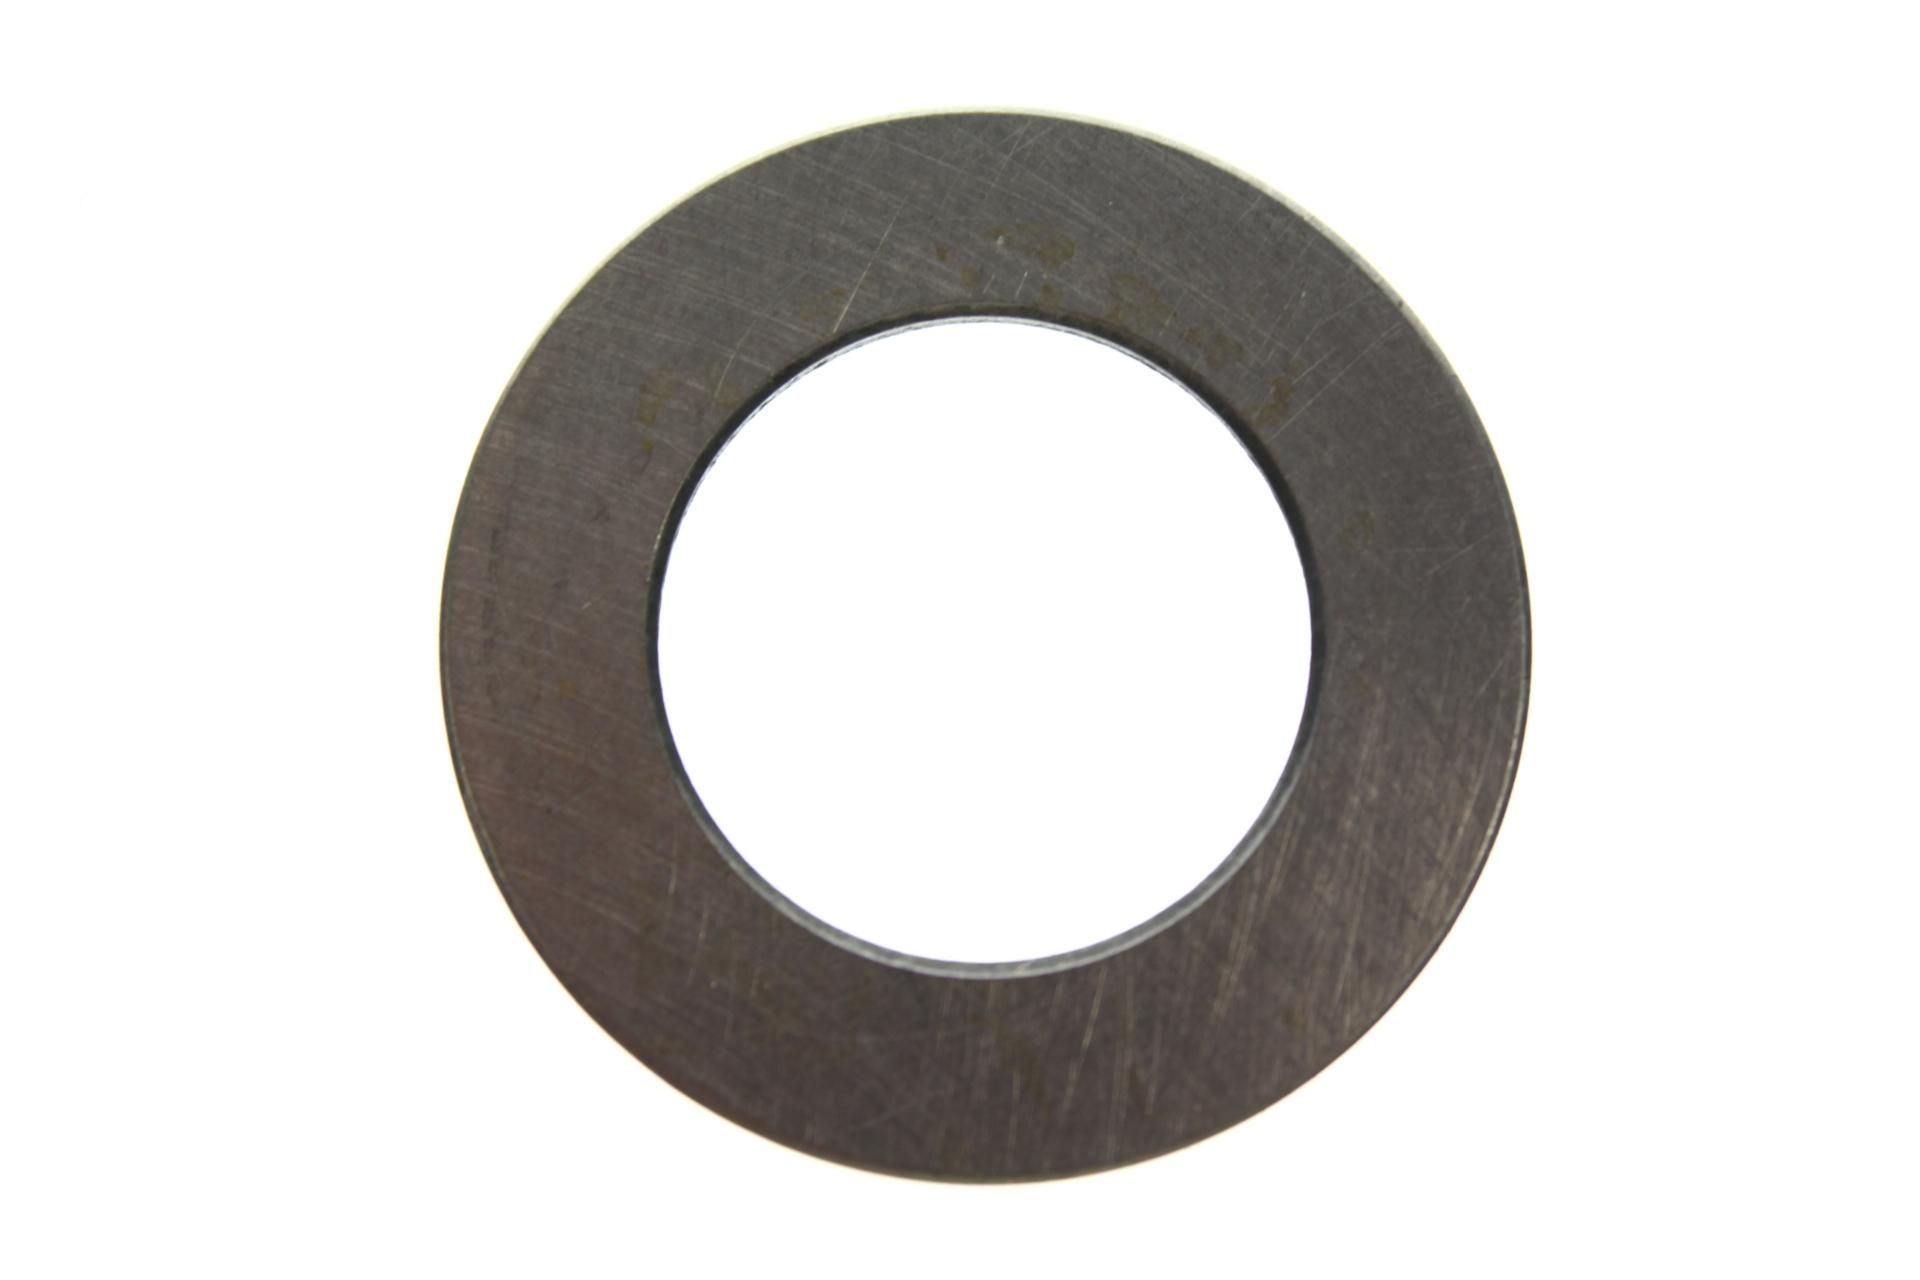 90201-20611-00 Superseded by 90201-204K8-00 - WASHER,PLATE